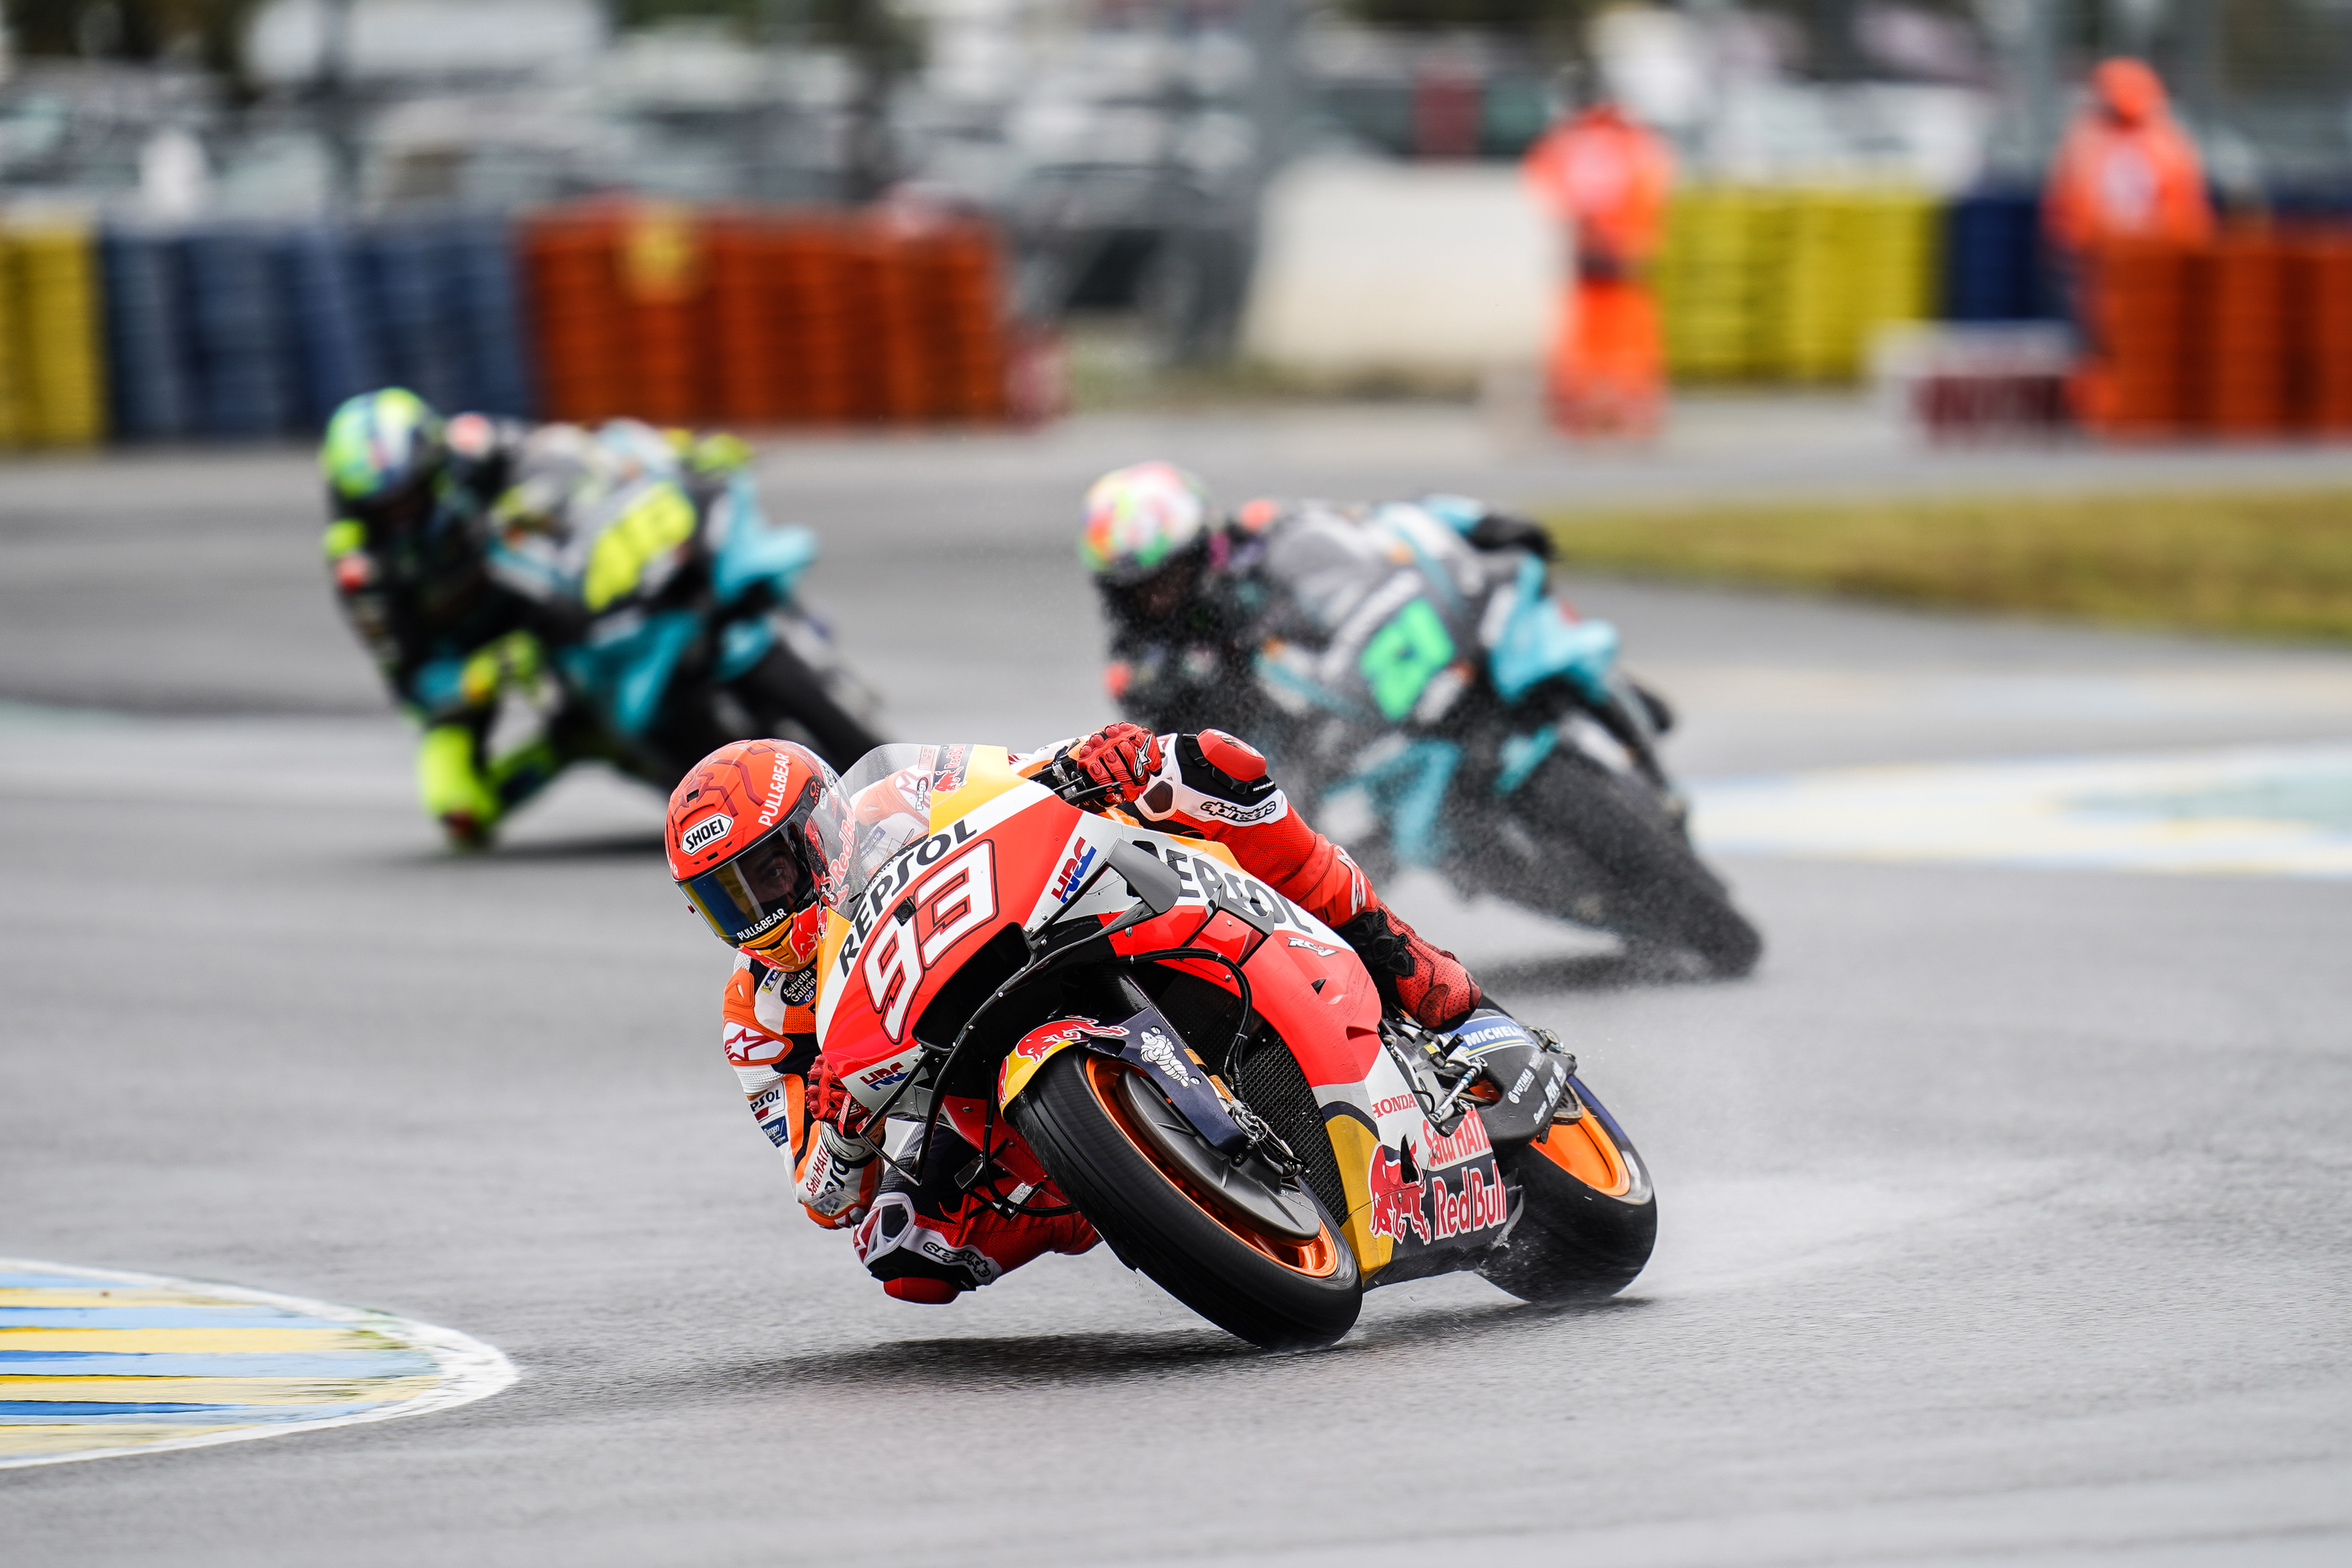 marquez-returns-to-the-battle-for-victory-as-espargaro-salvages-eighth-in-dramatic-2021-french-gp